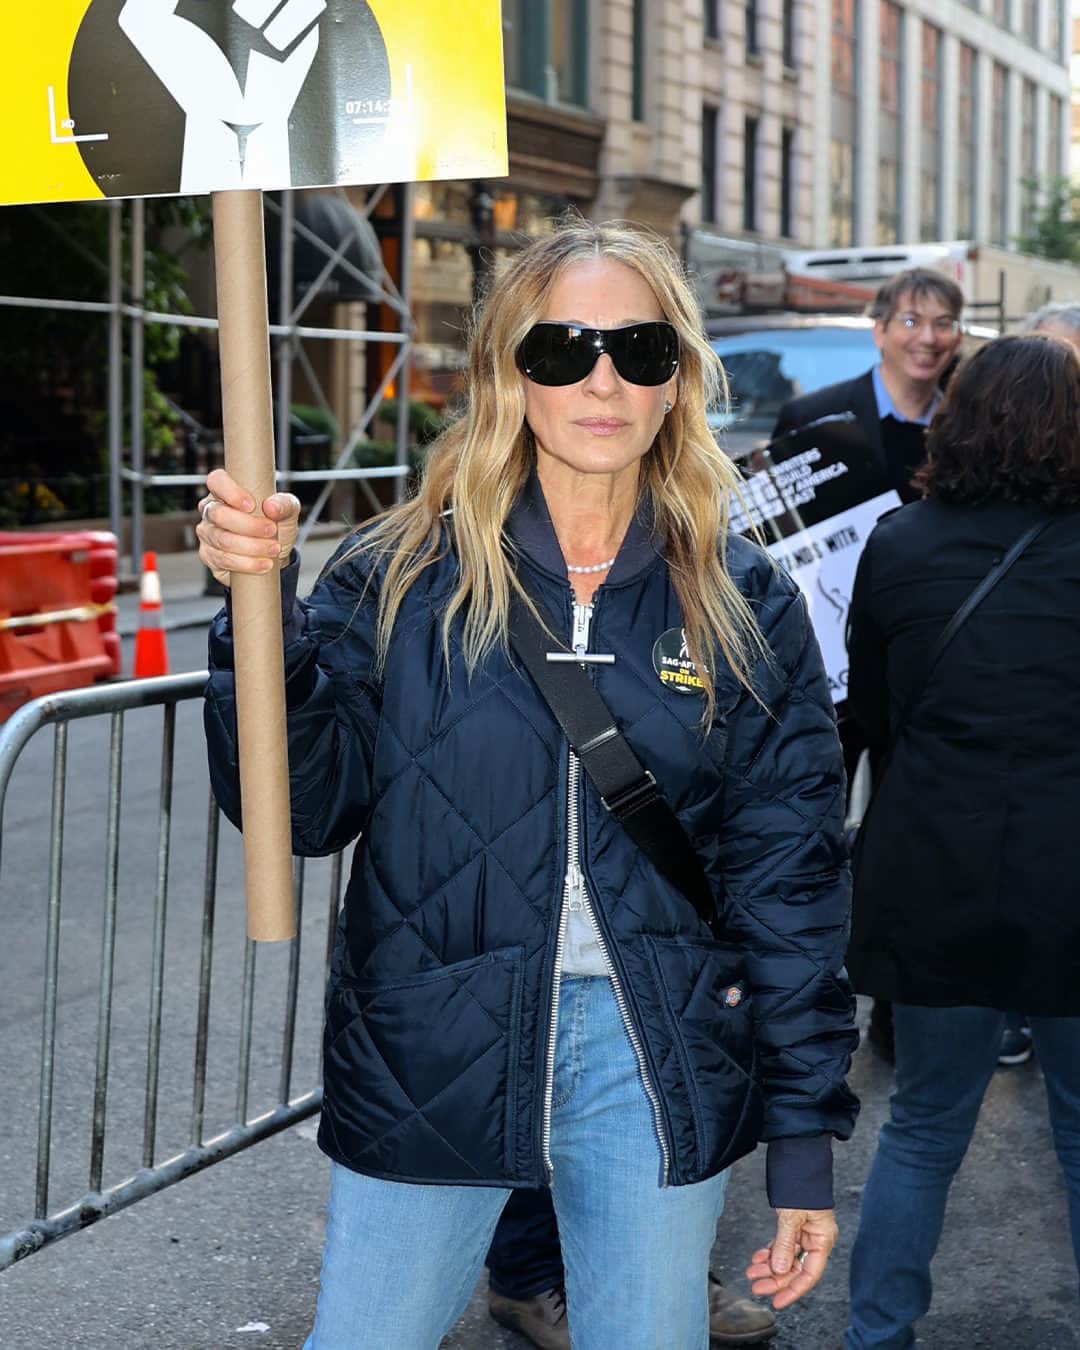 British Vogueのインスタグラム：「The #SAGAFTRA strike is over. The union has approved a tentative agreement that will end the longest actors’ strike against the major studios in Hollywood history. After 118 days, during which stars like #SarahJessicaParker joined the picket line in solidarity, the strike will officially end on Thursday. Hit the link in bio for everything you need to know.」